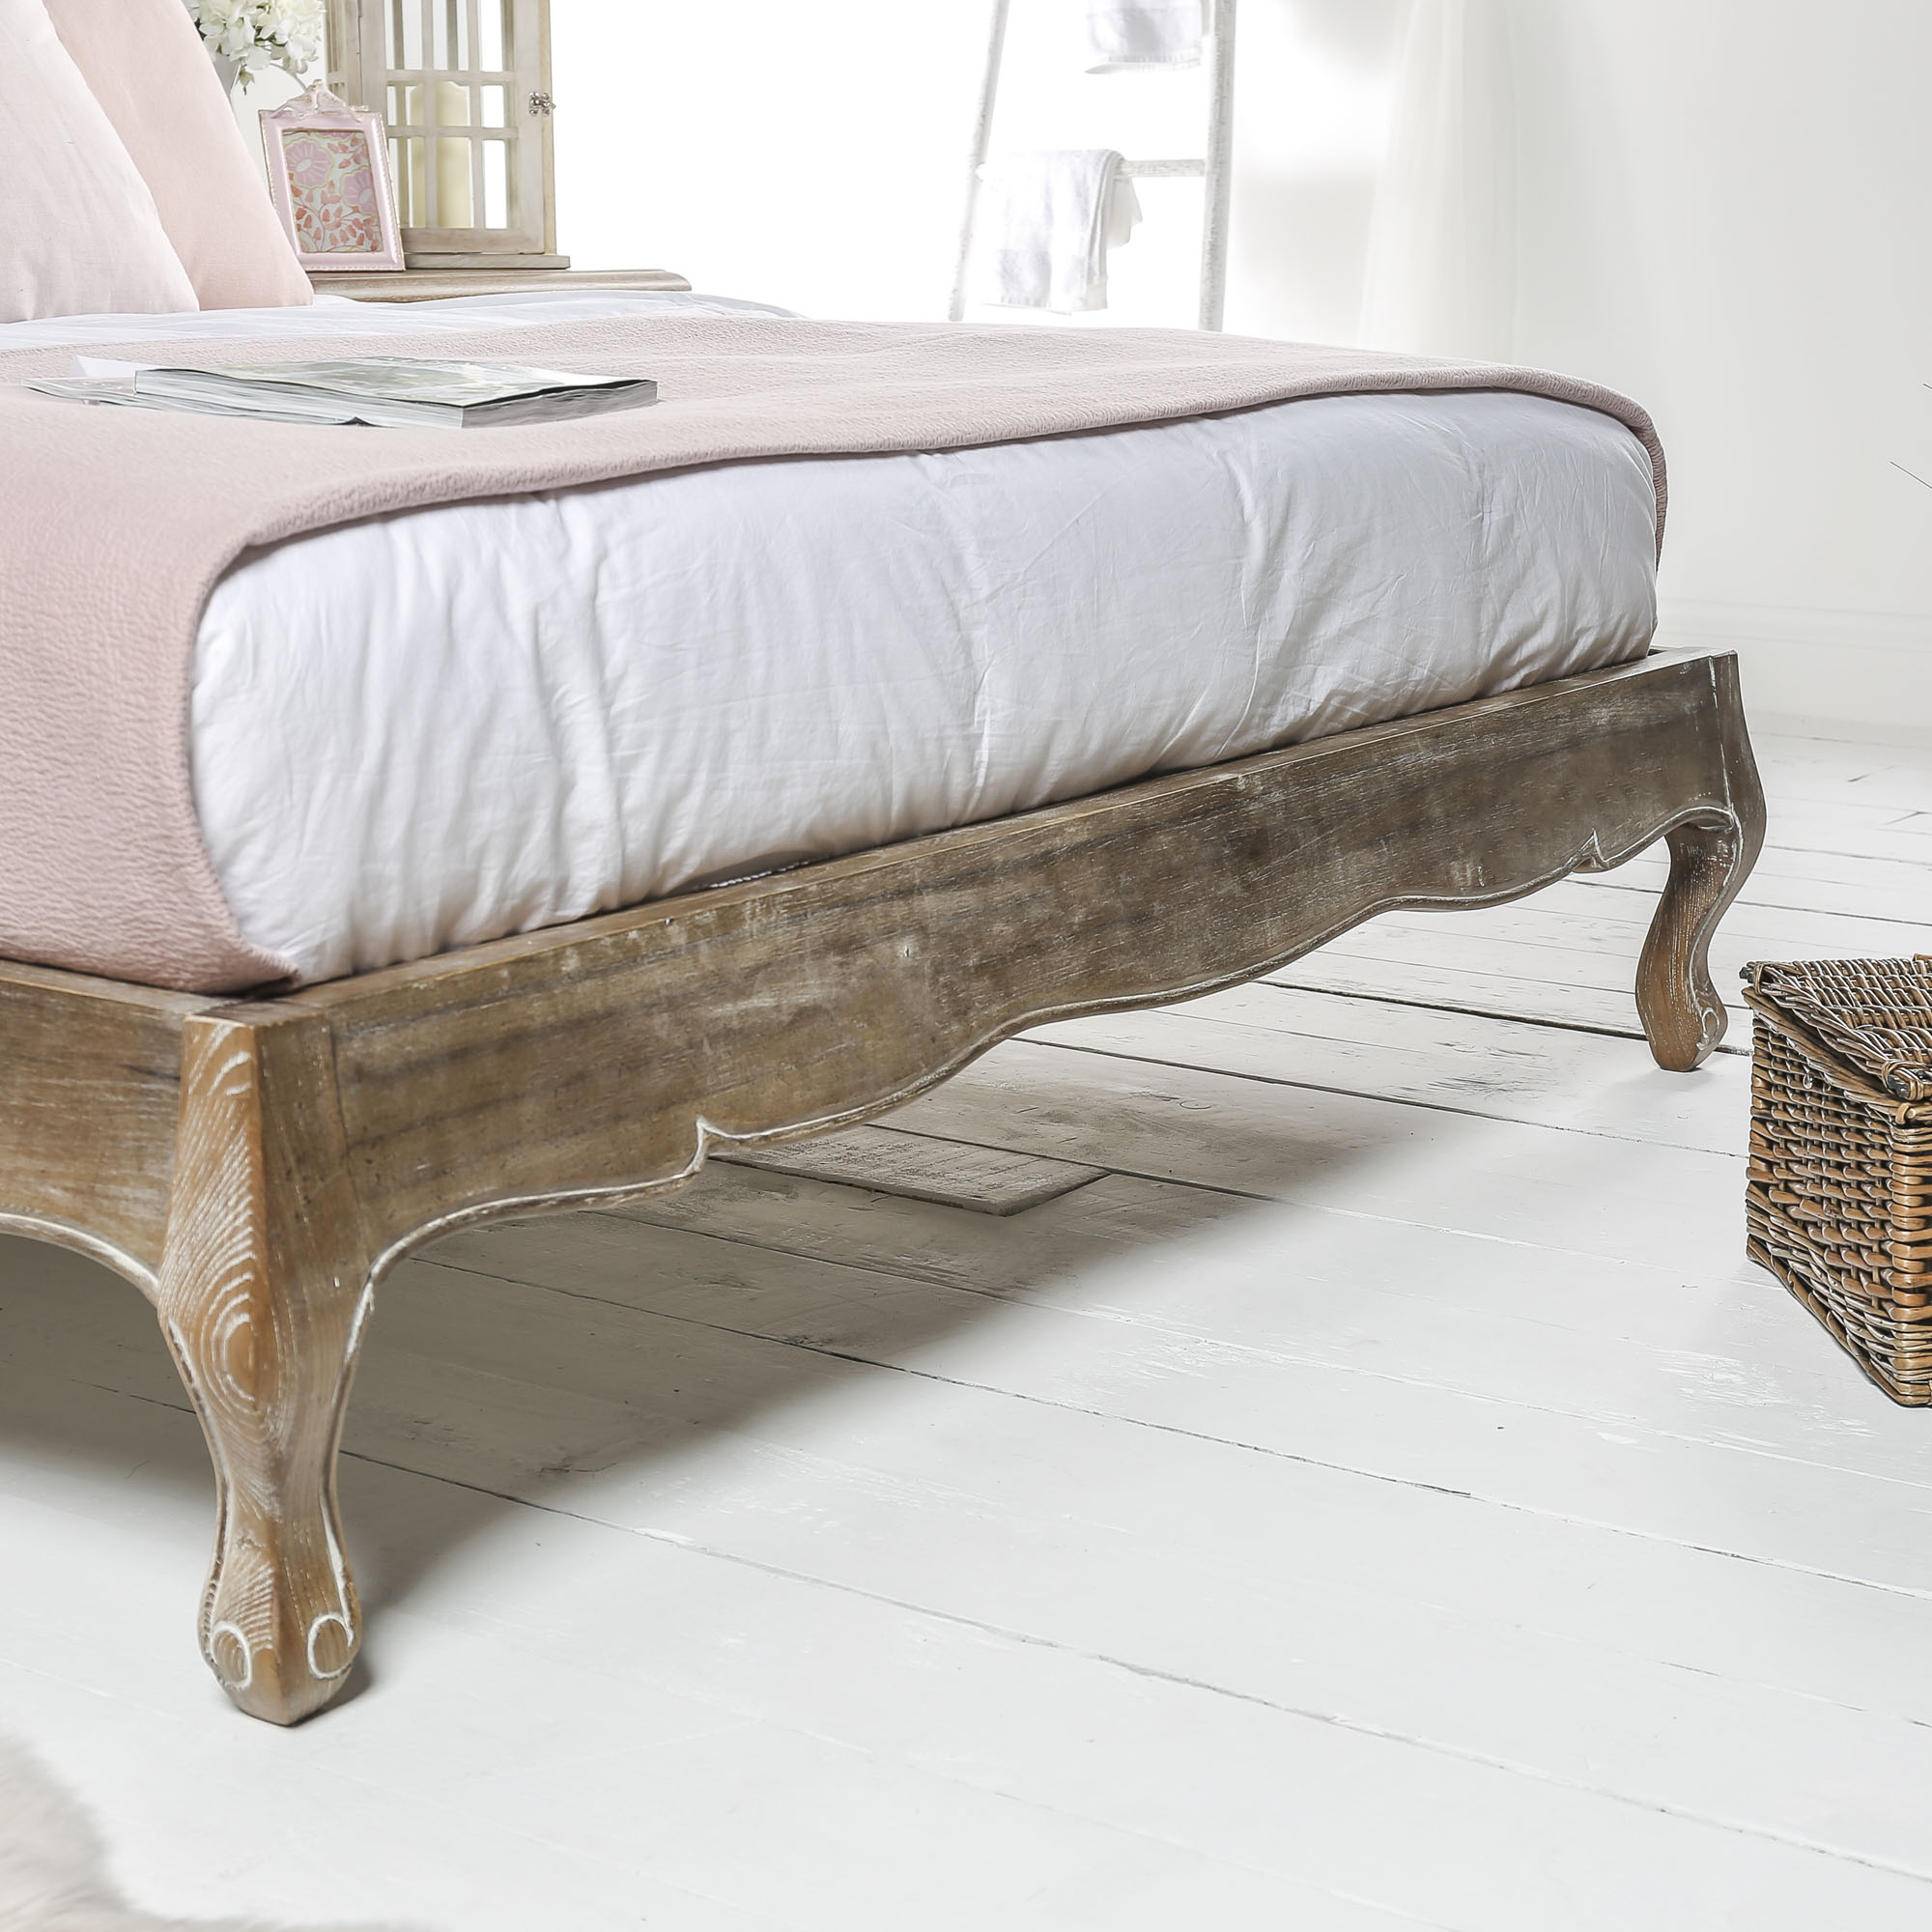 Eloise French Weathered Limed Ash Low Foot Board Bed – Super King Size